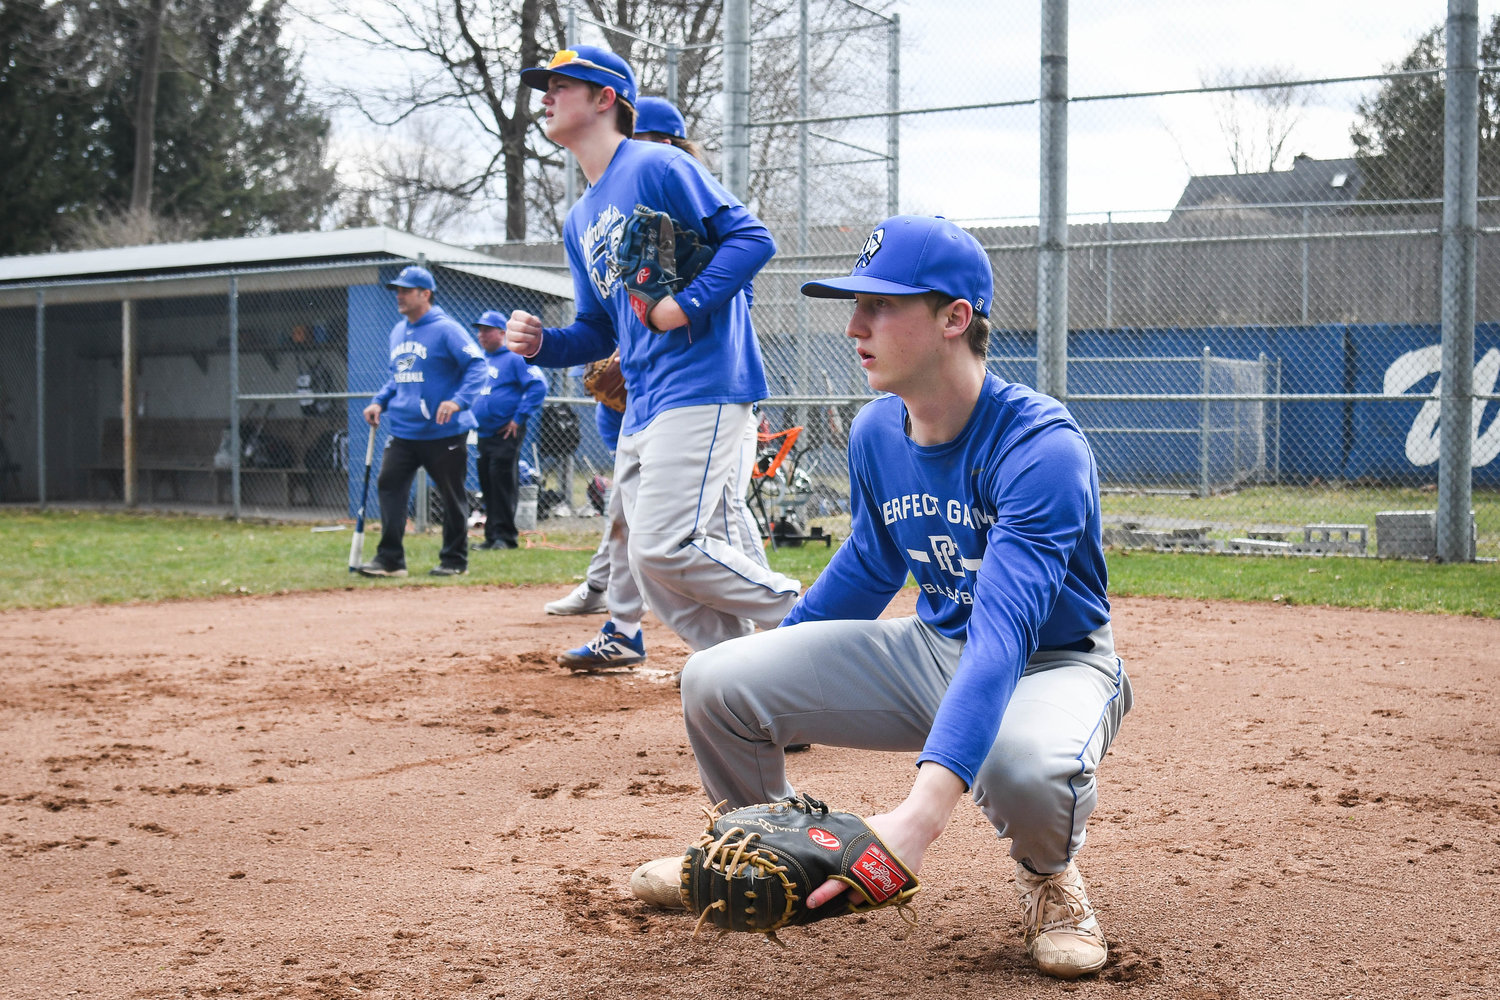 LOOKING OUT — Whitesboro players run pitcher and catcher fielding drills during practice on Tuesday. The goal remains a deep run into June for Whitesboro.